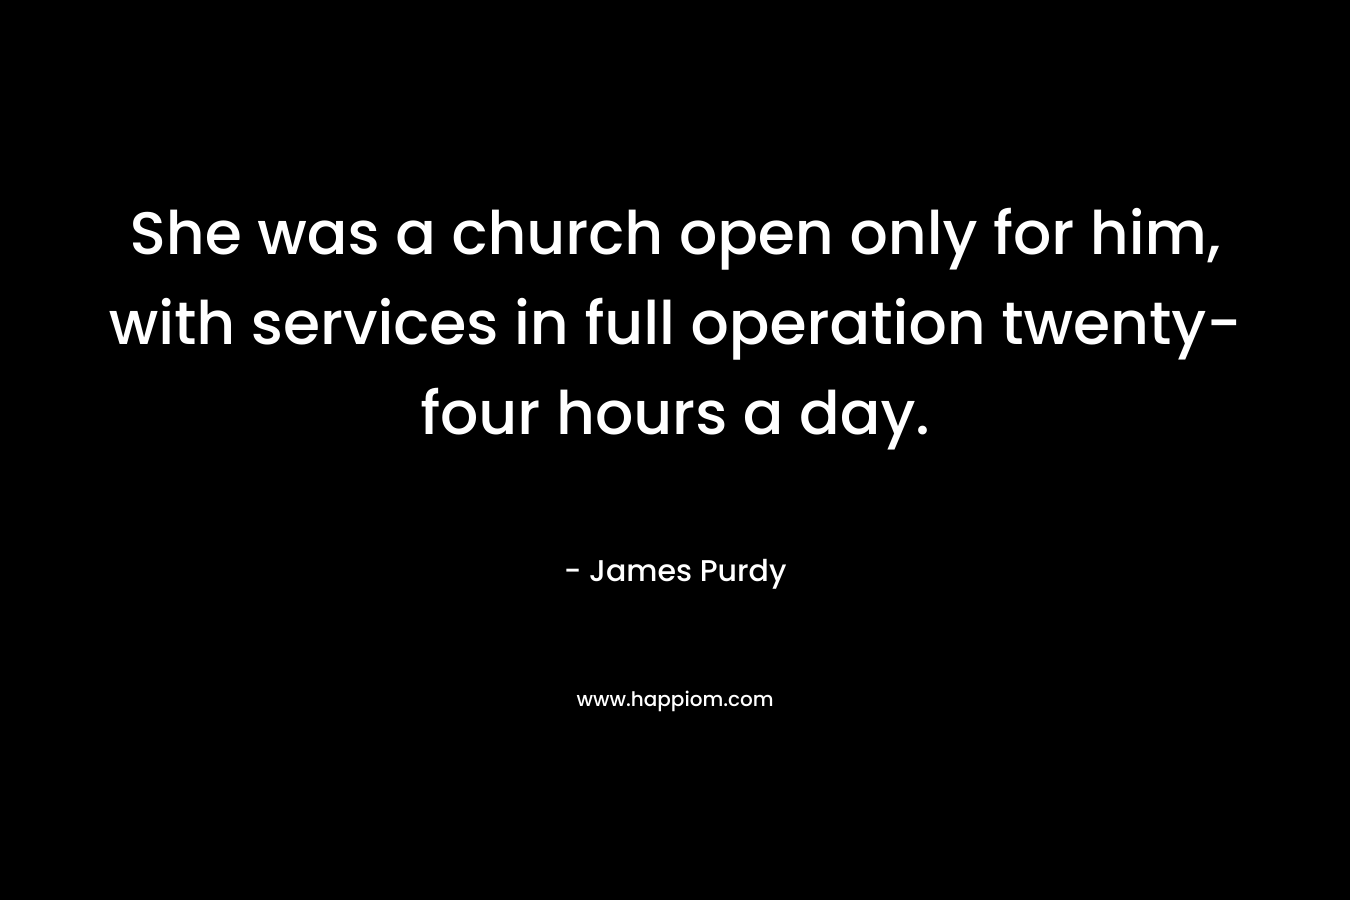 She was a church open only for him, with services in full operation twenty-four hours a day.